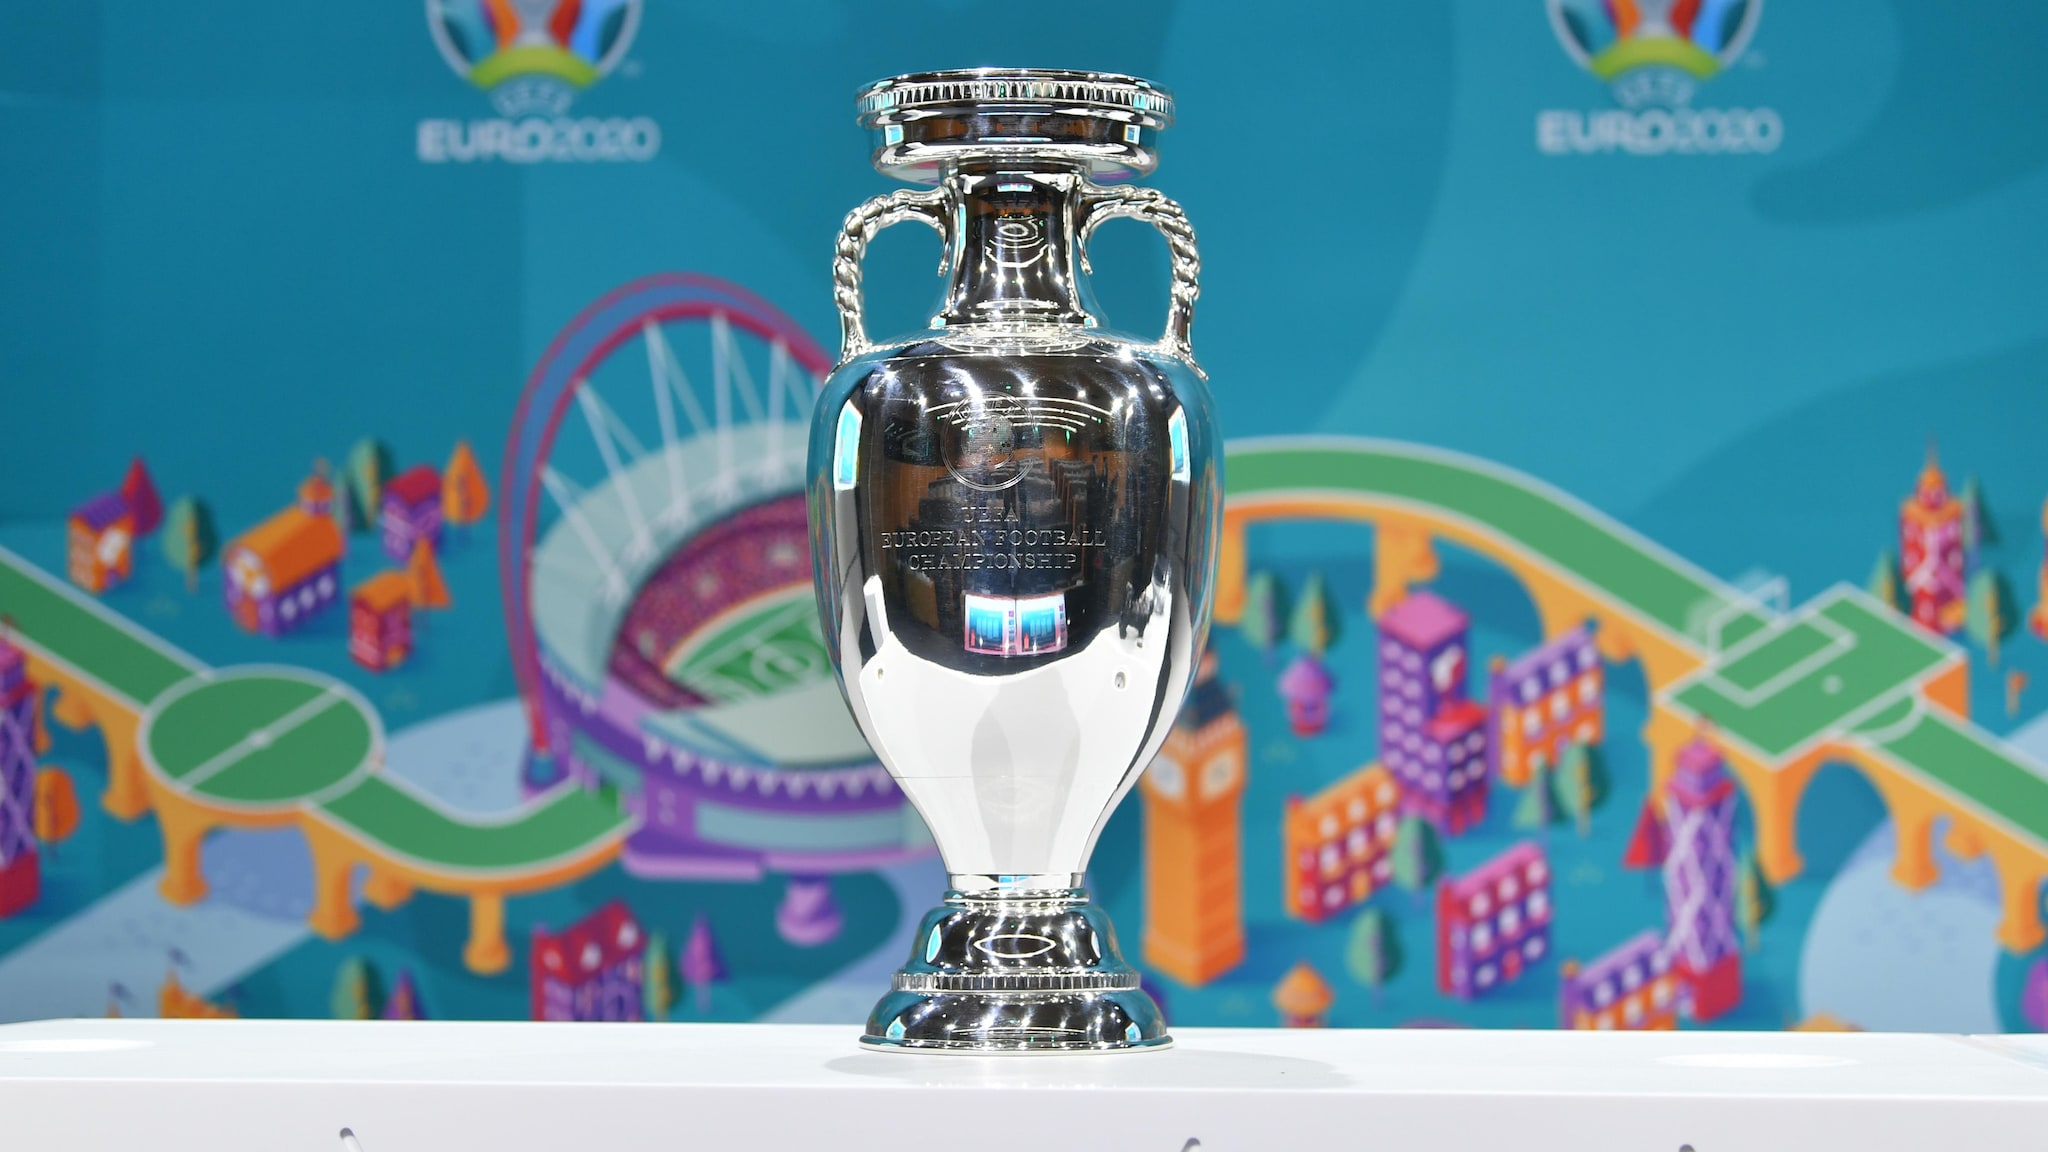 Change of venues for some UEFA EURO 2020 matches announced | Inside